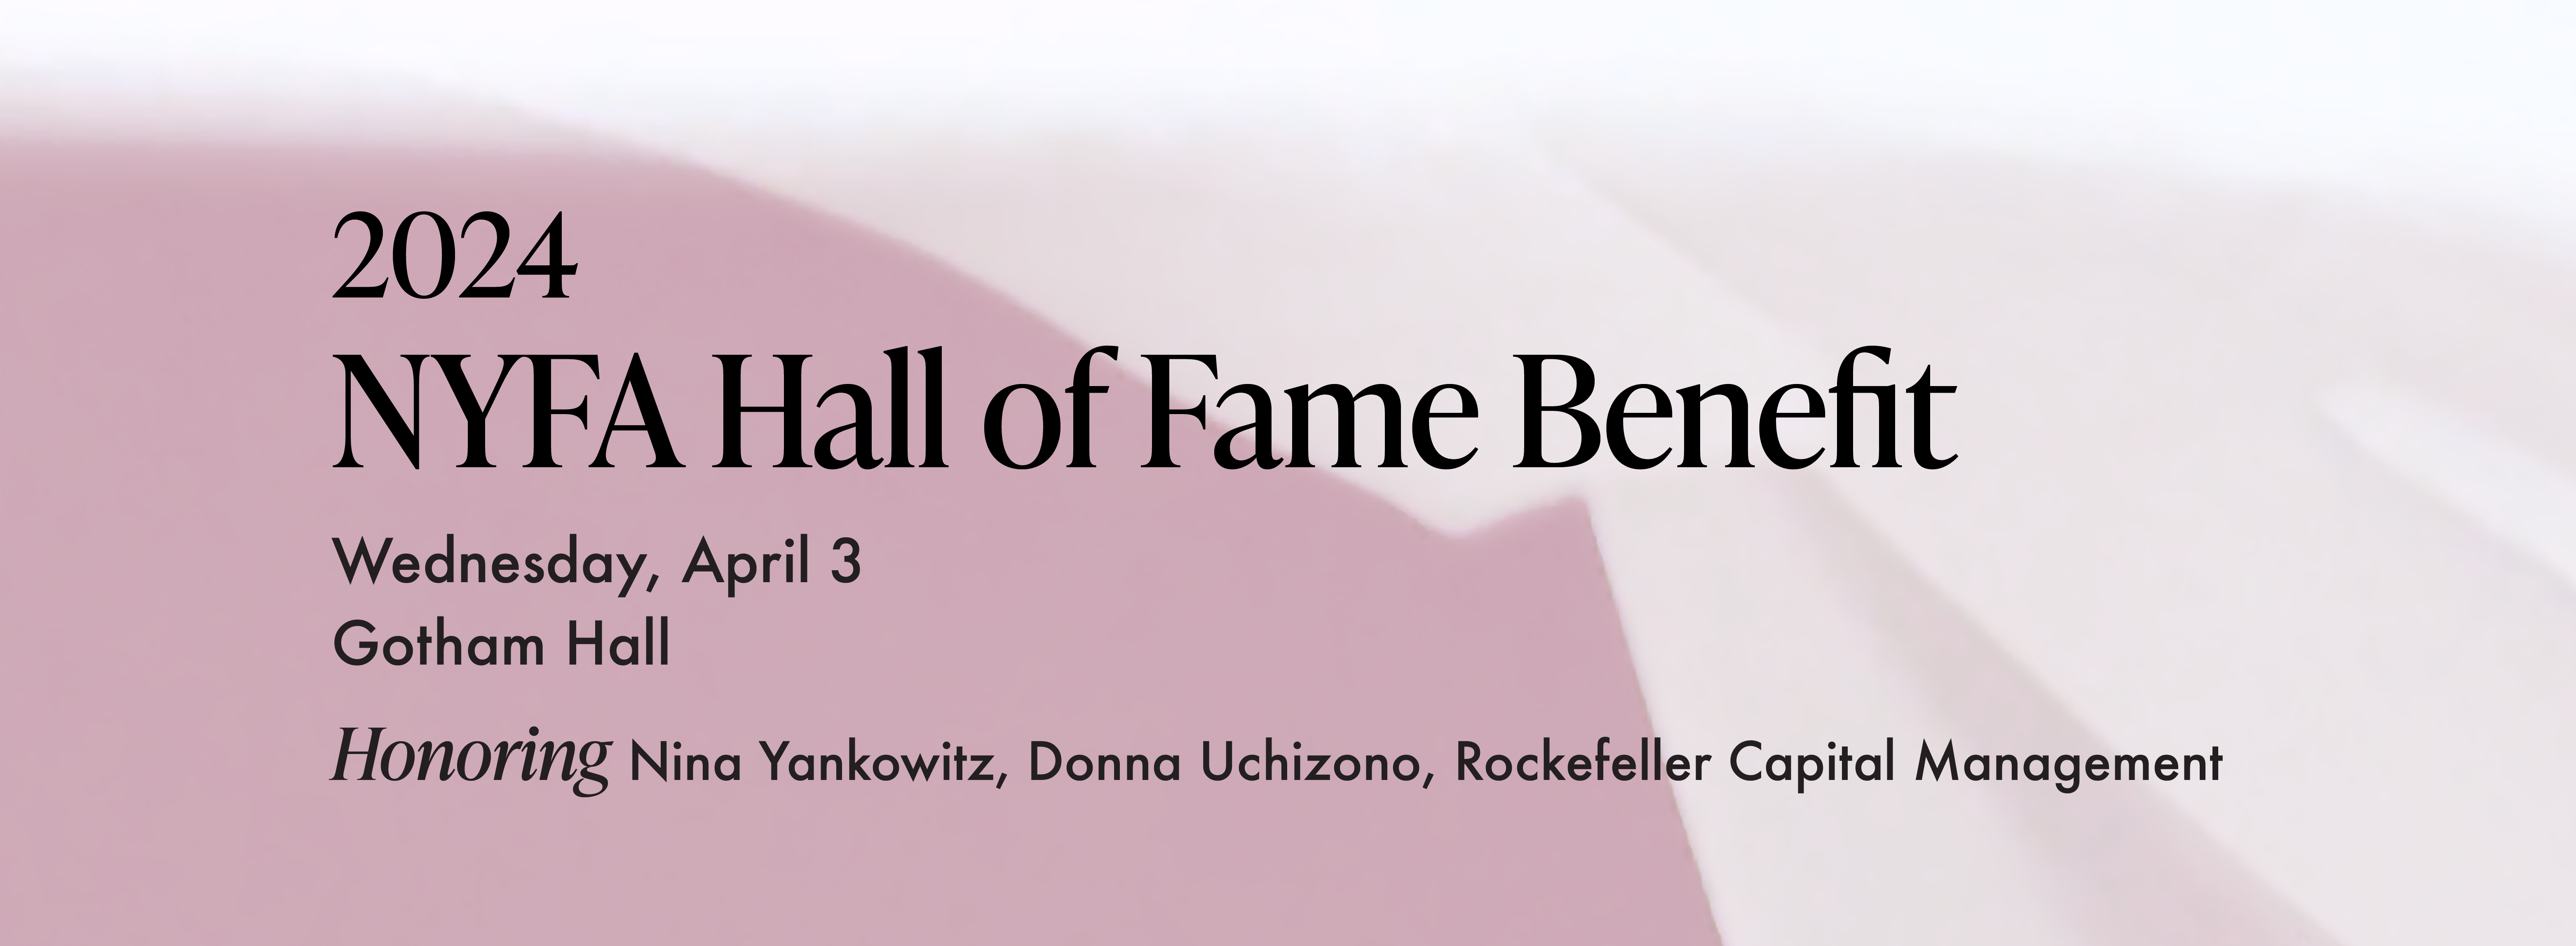 2024 Hall of Fame Benefit